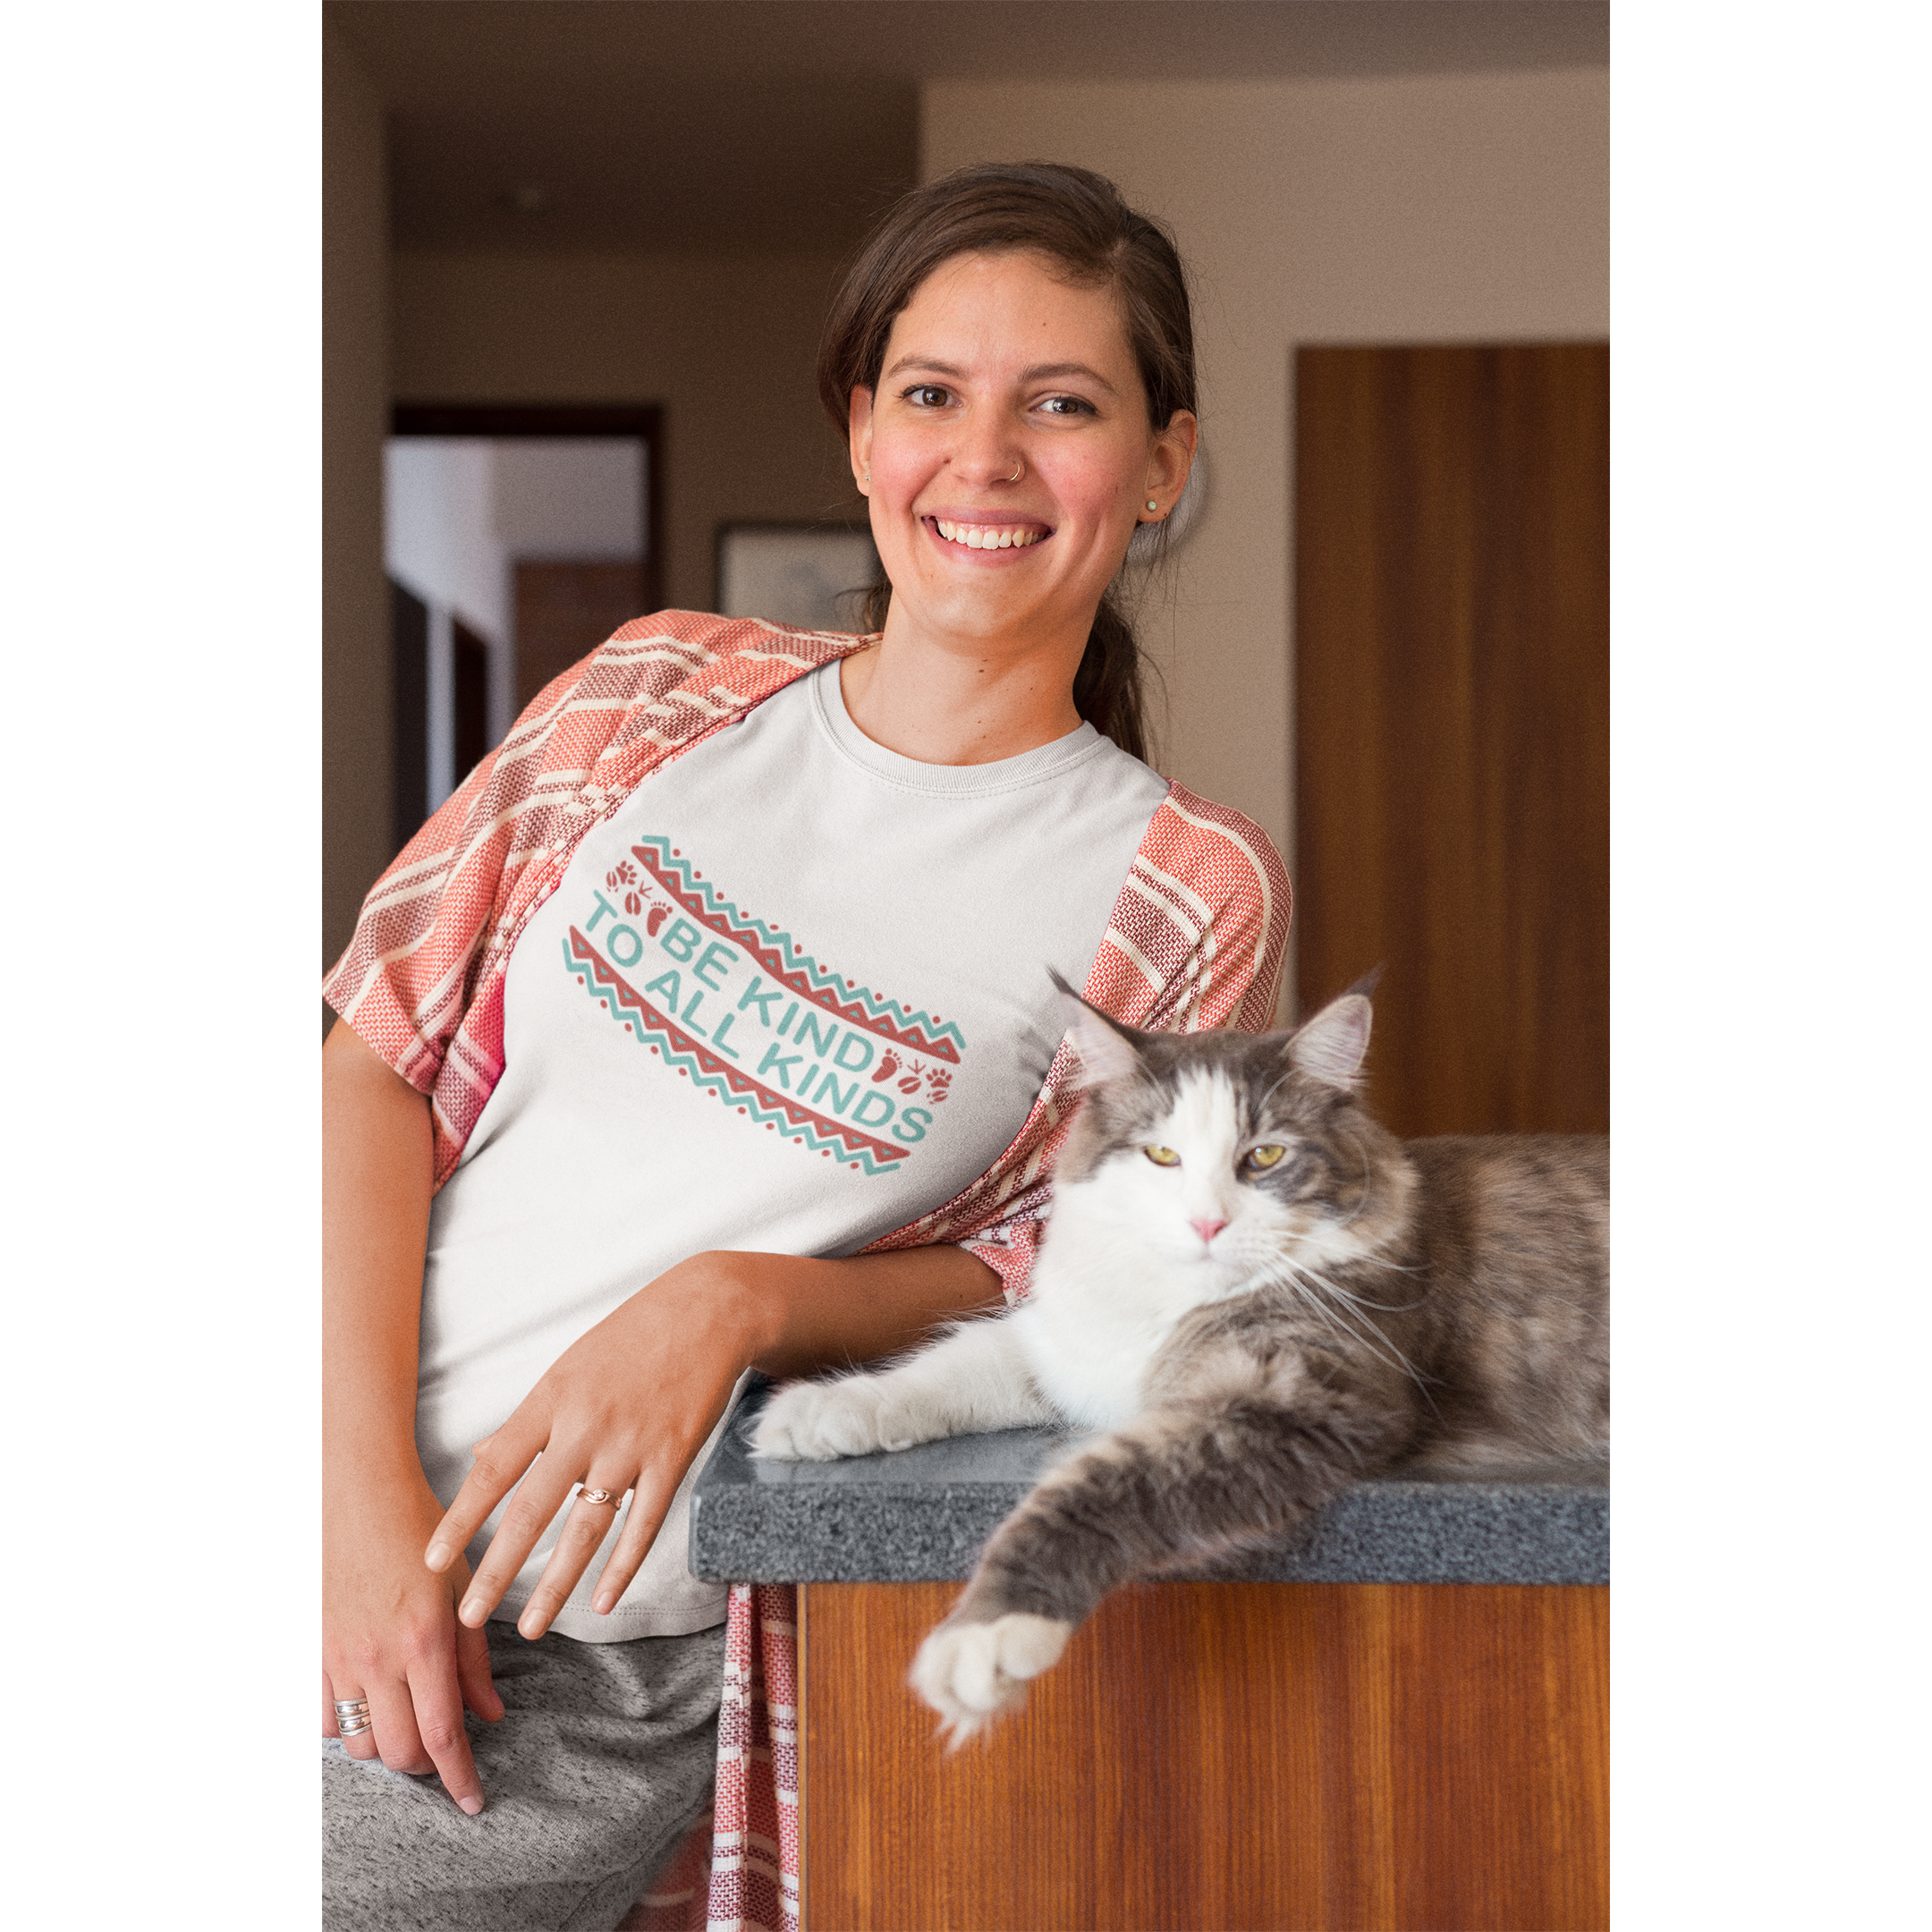 woman leaning with cat wearing "be kind to all kinds" boho style white vegan t shirt made for boho tops